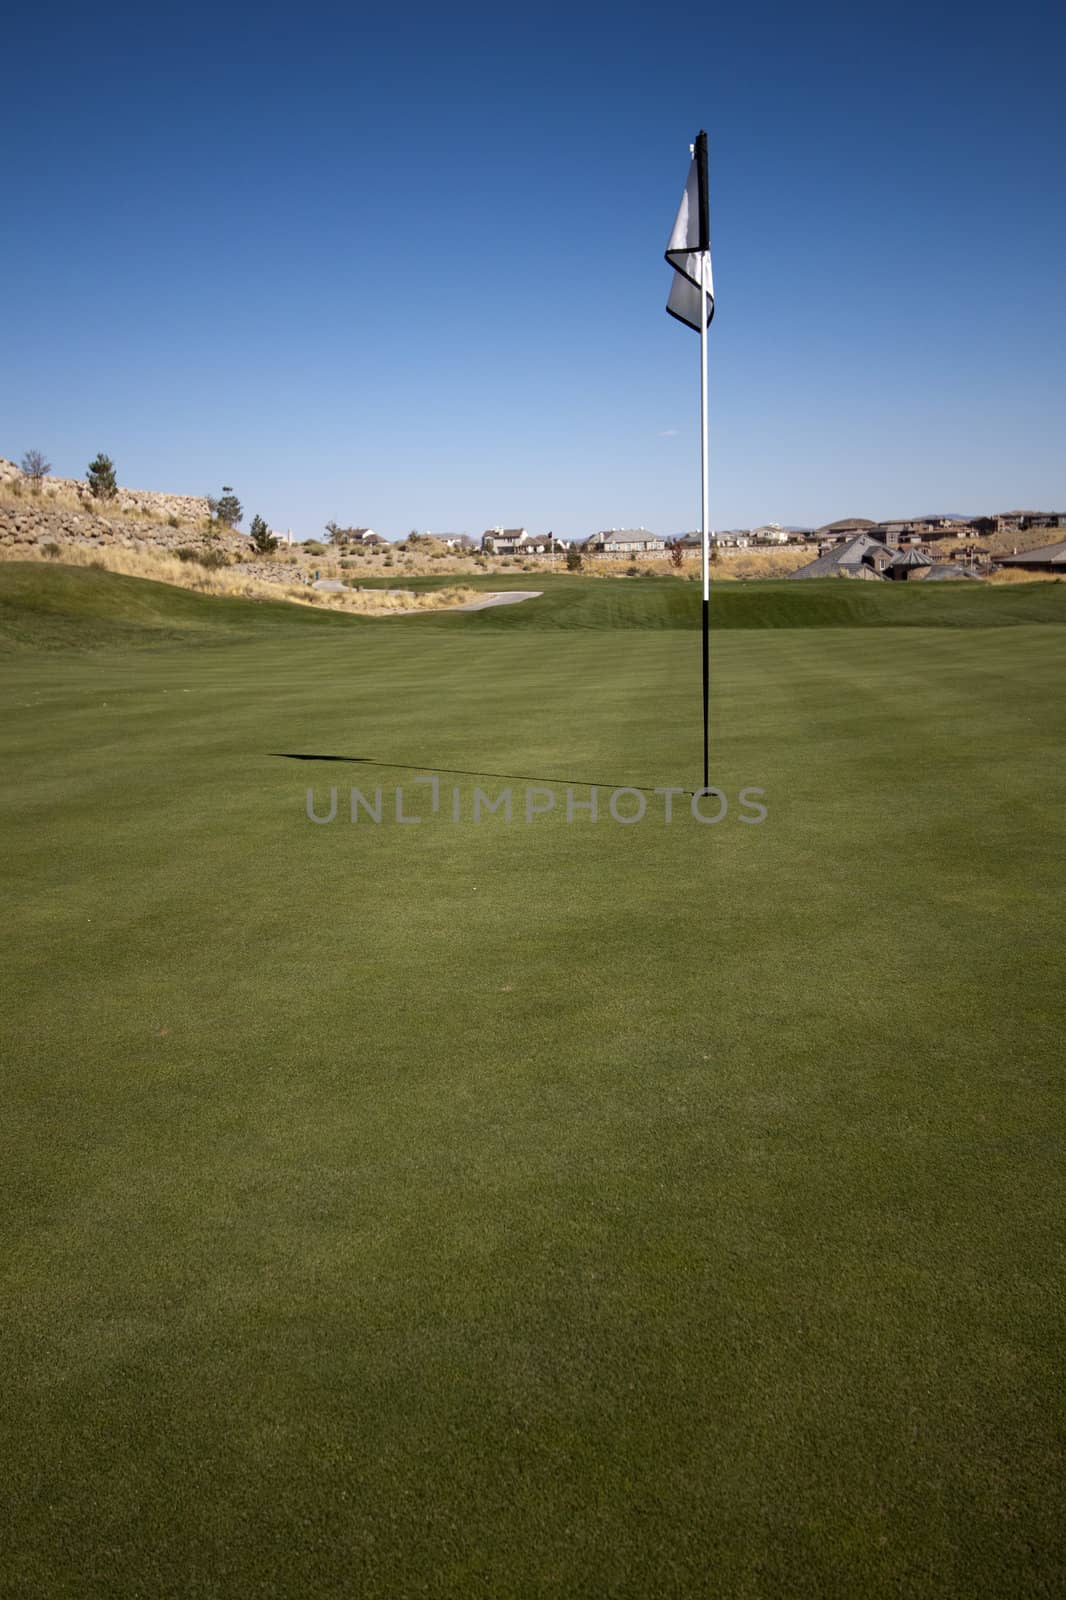 Golf course with green grass and clear blue skies.